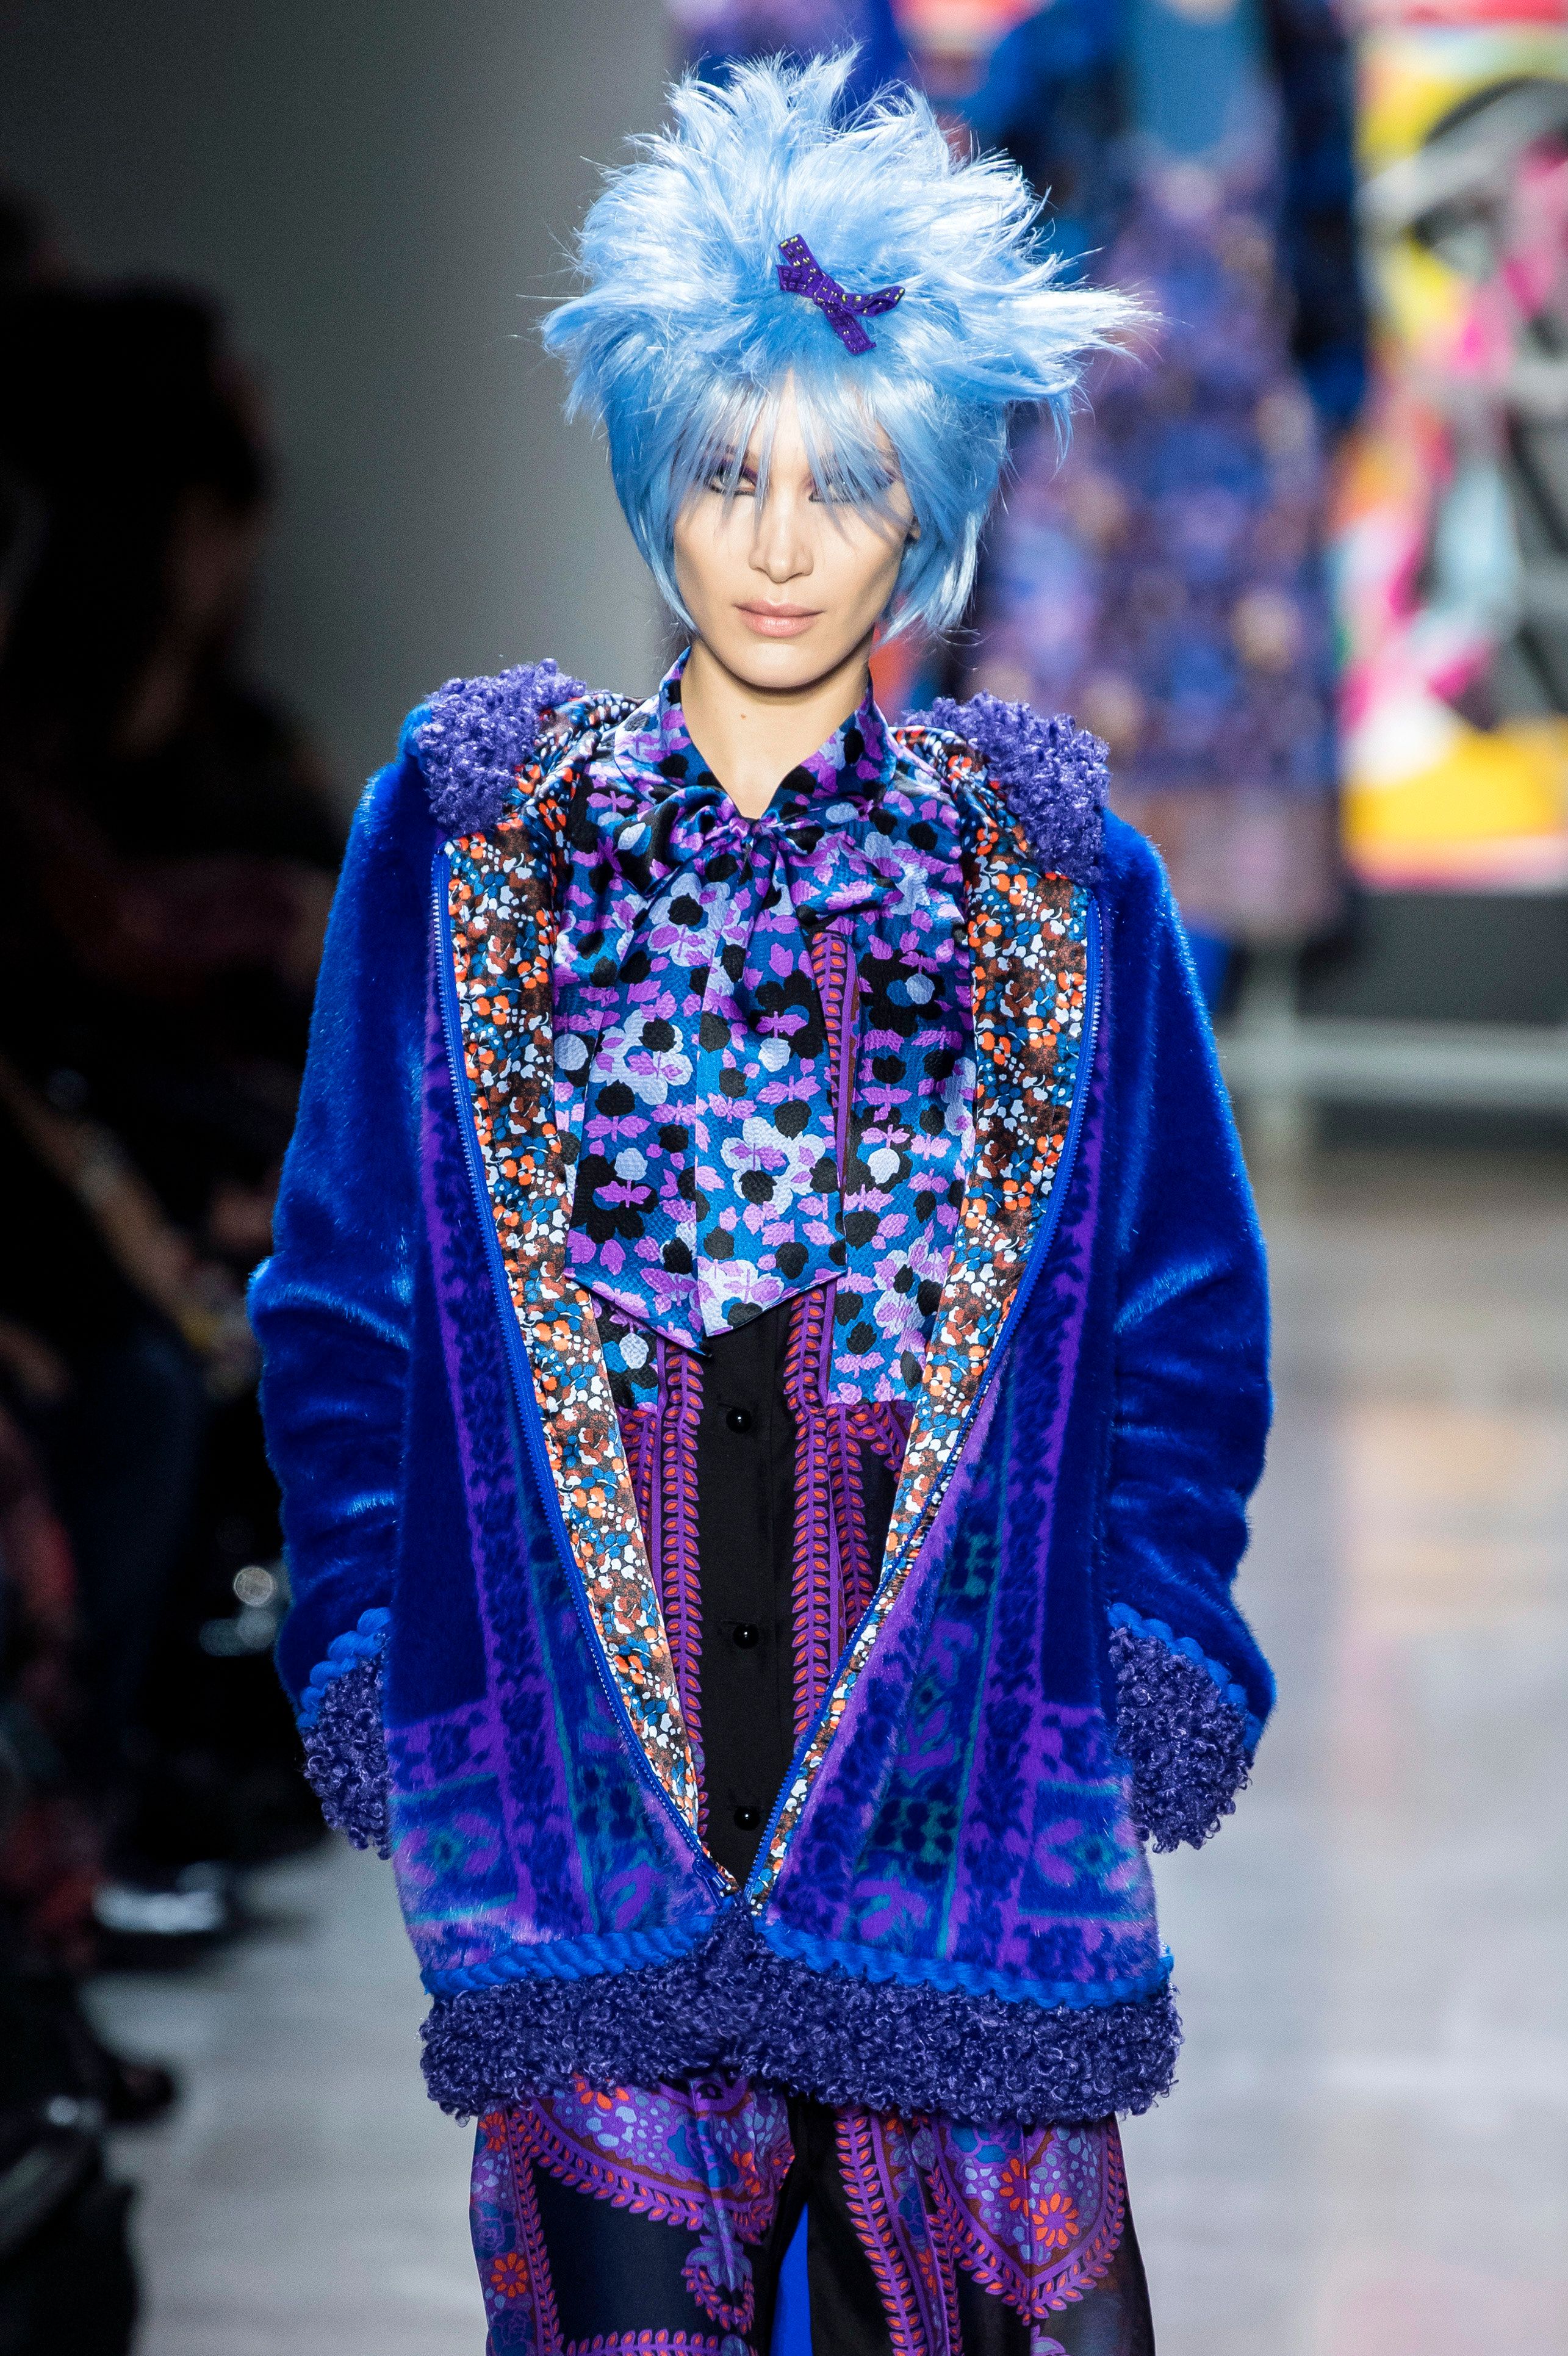 Anna Sui Wants You to Match Your Hair to Your Outfit - PAPER Magazine